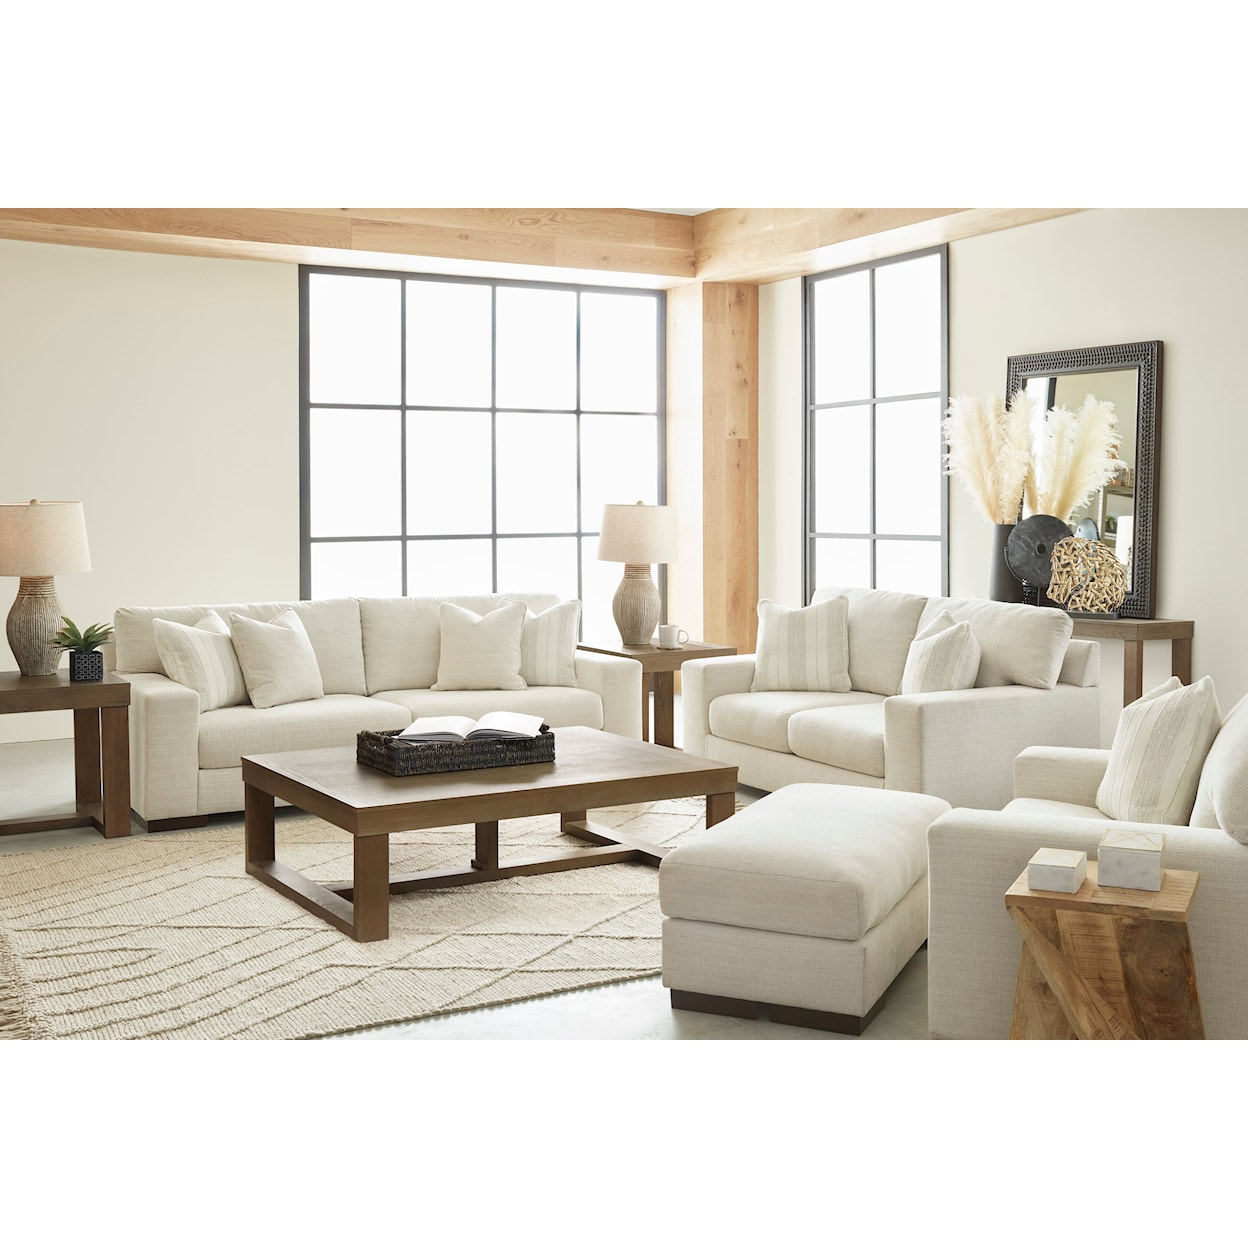 Signature Design by Ashley Maggie 3 Piece Living Room Set